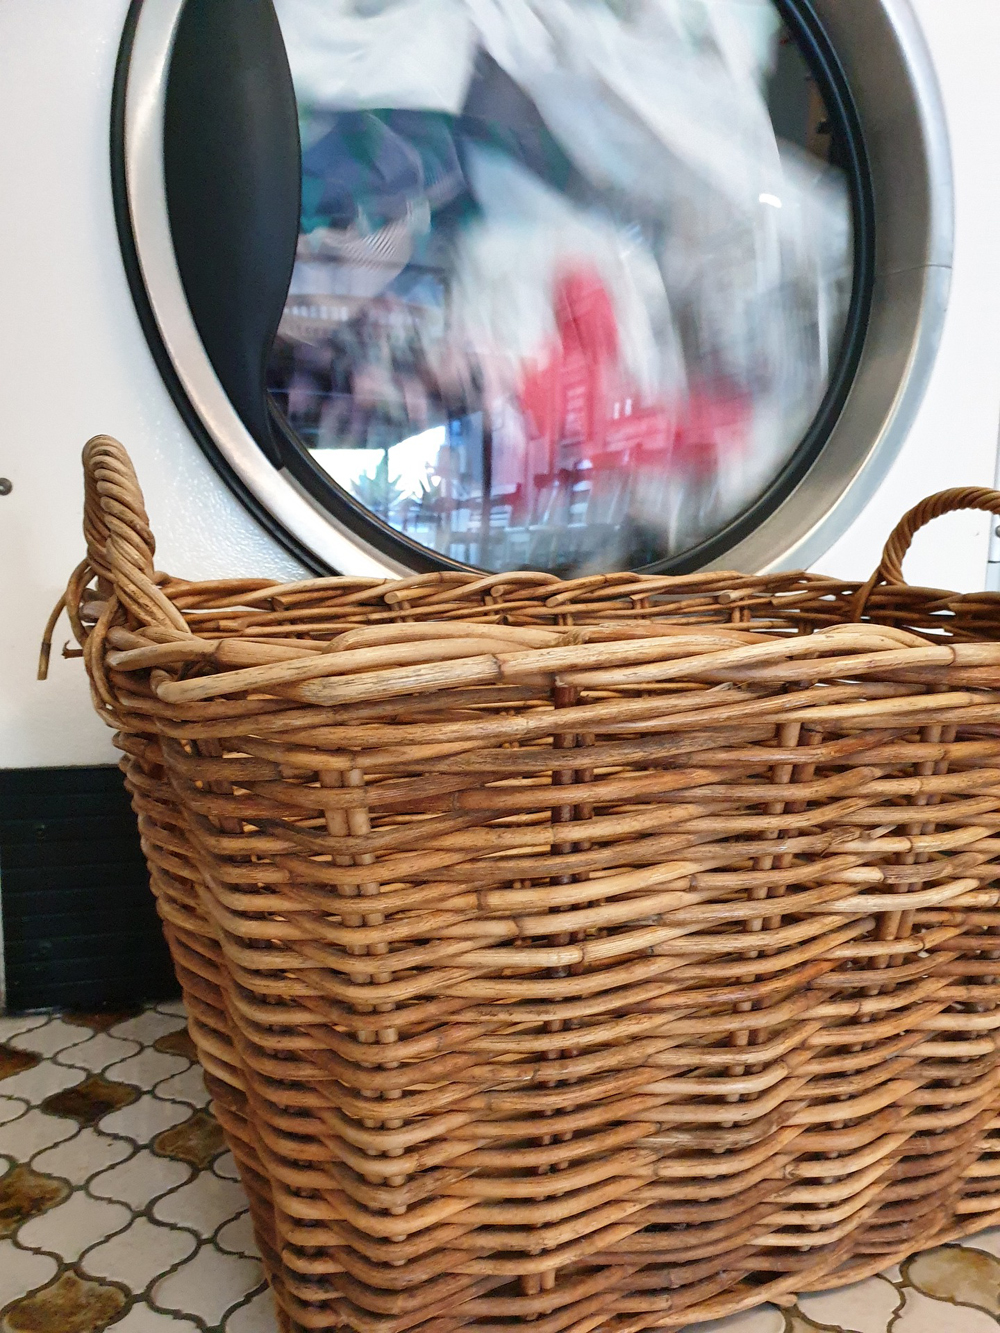 Laundry Made Easy – 7 Simple Tricks That Won't Let You Down